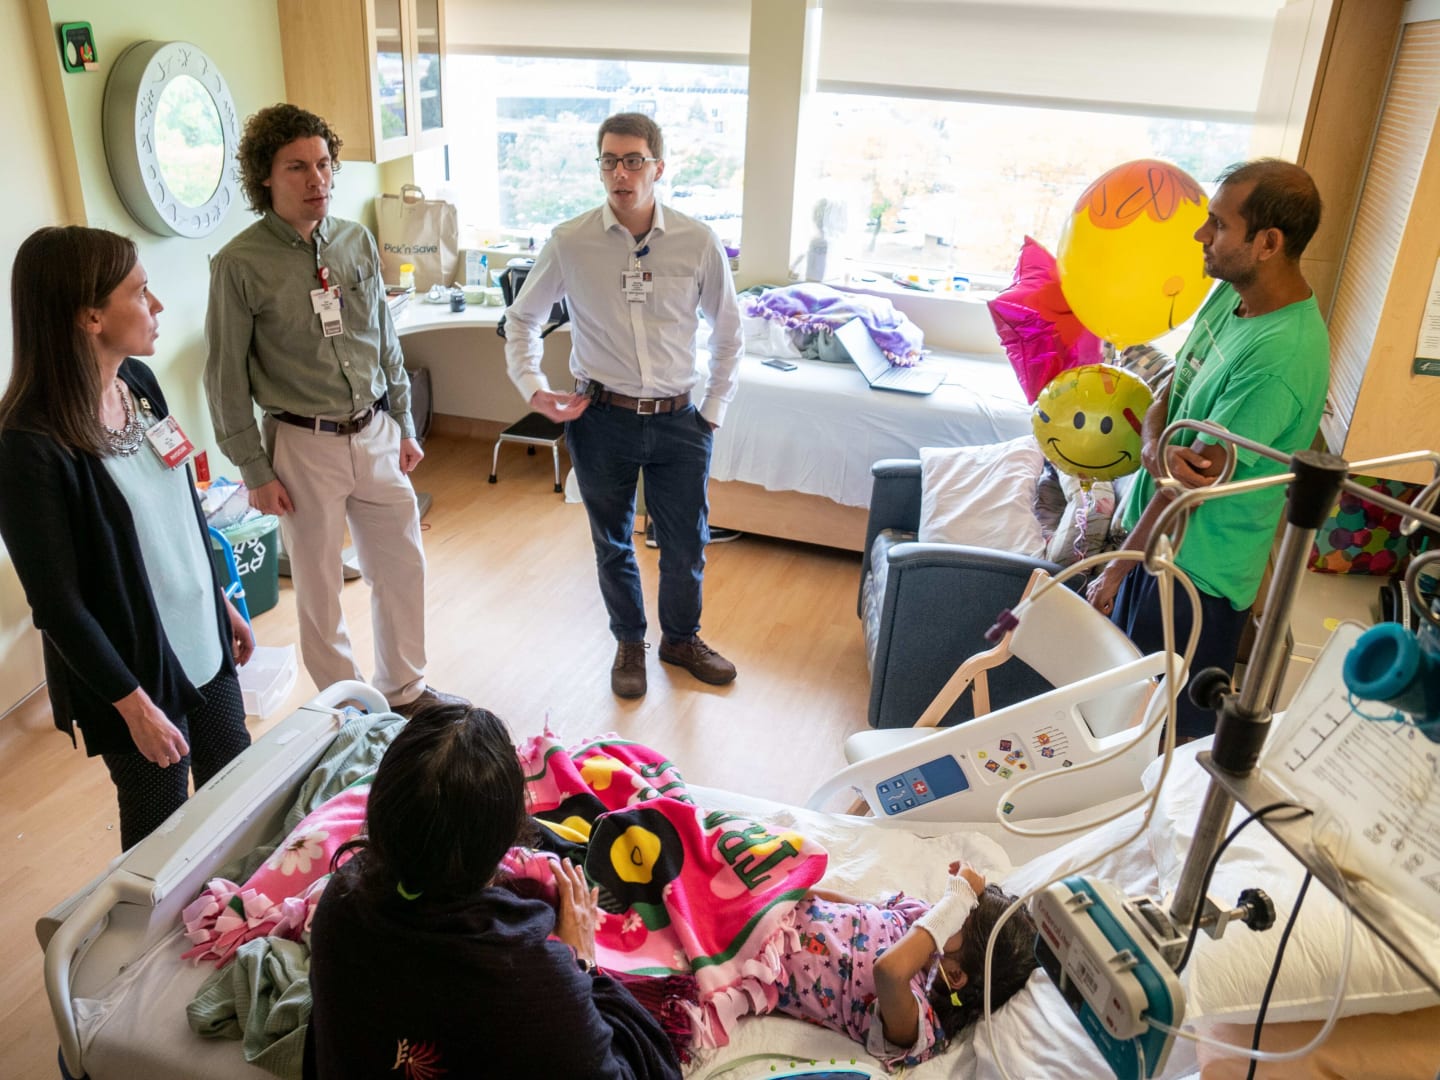 A family gathered around a child in a hospital bed